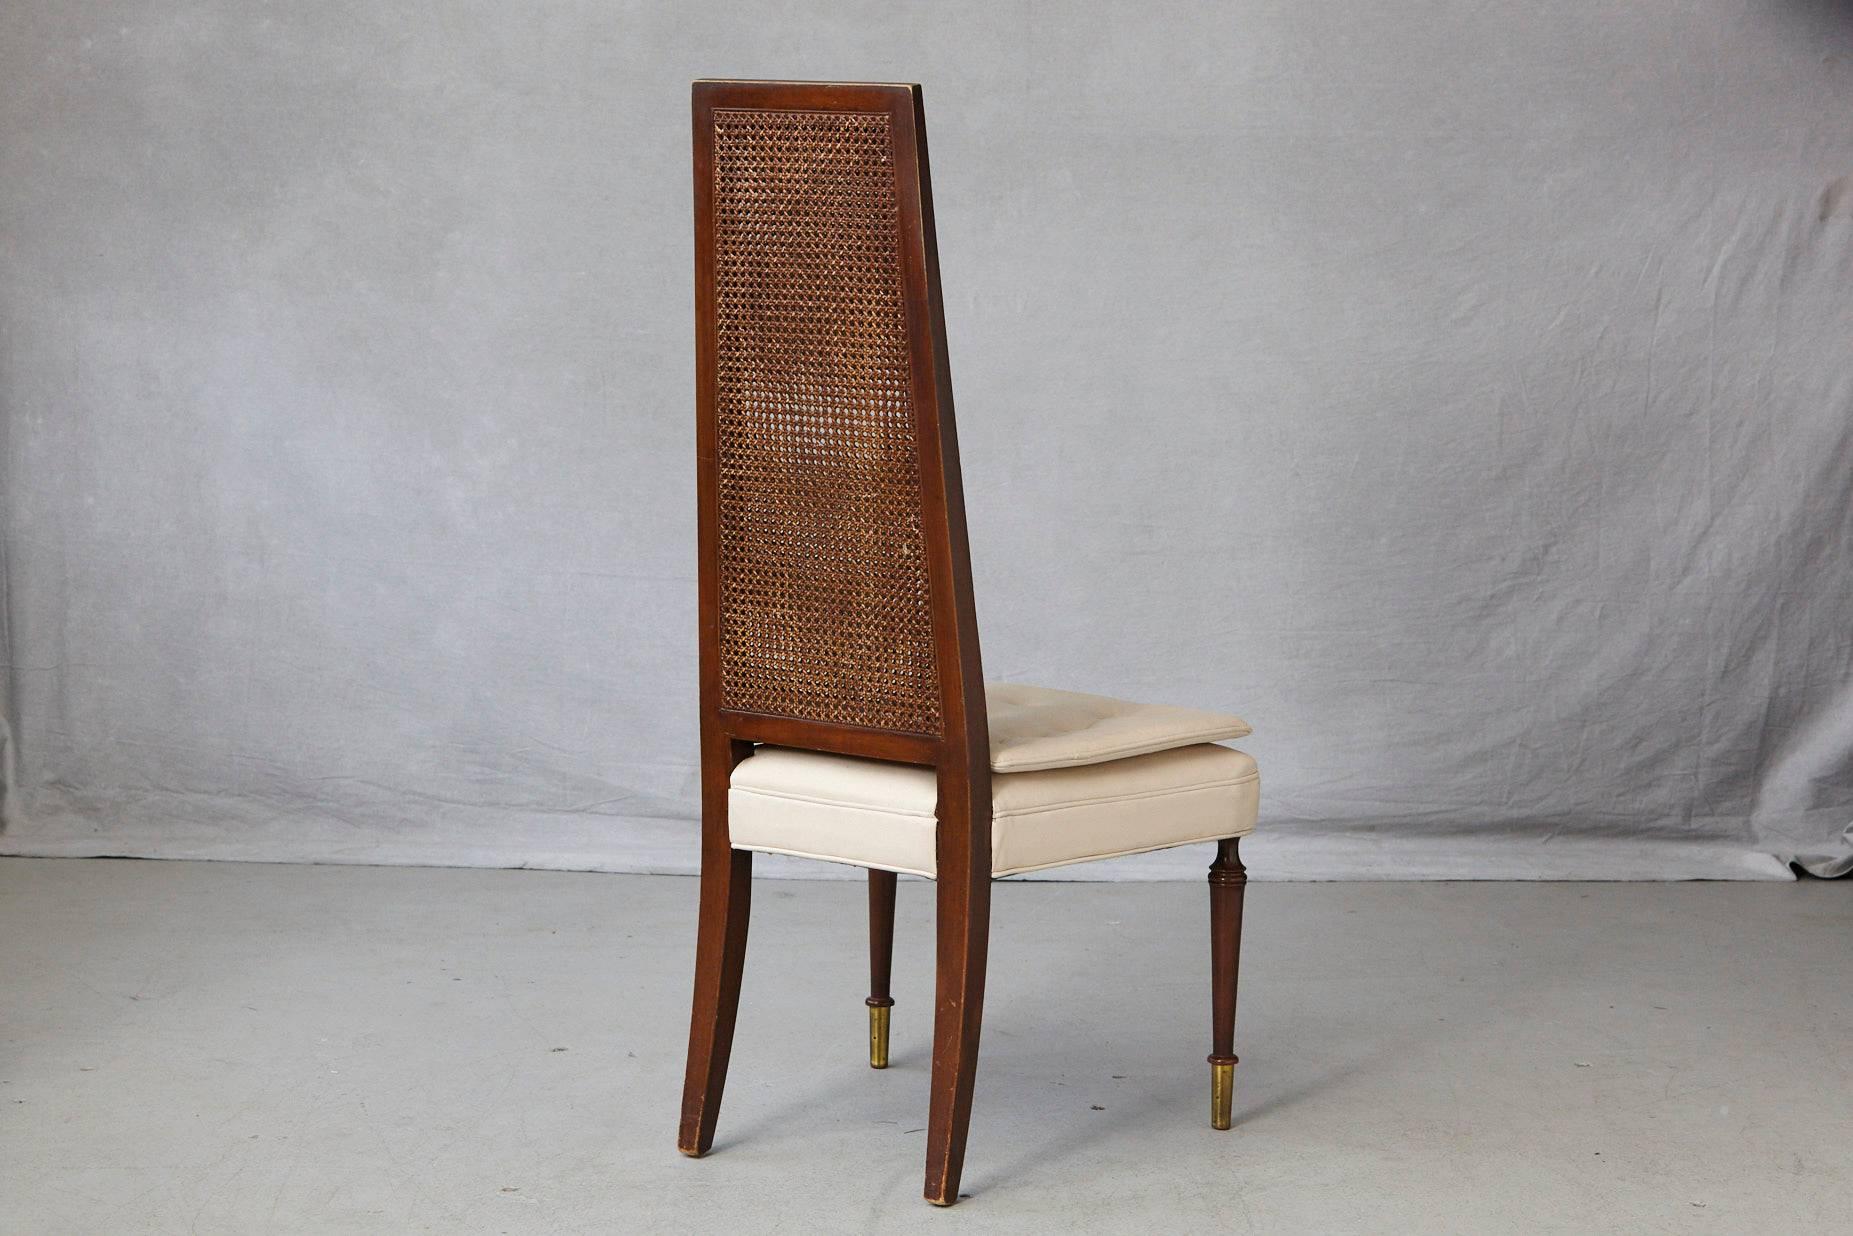 American High Back Desk Chair with Double-Sided Rattan Back and Beige Faux Leather Seat